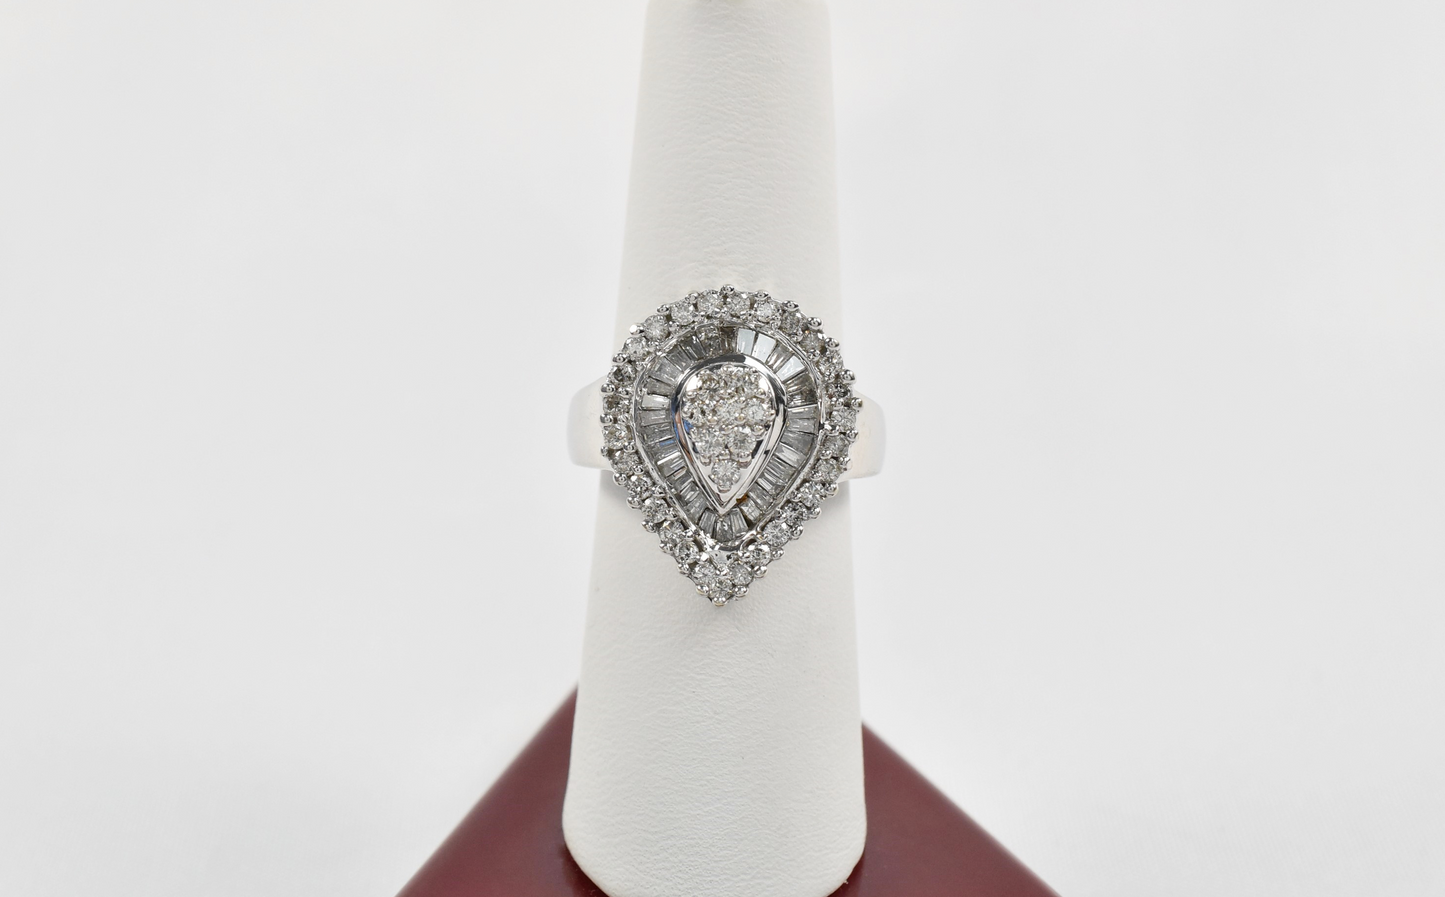 14k White Gold Pear Shaped Diamond Cluster Ring, Size 7.5 - 12.3g